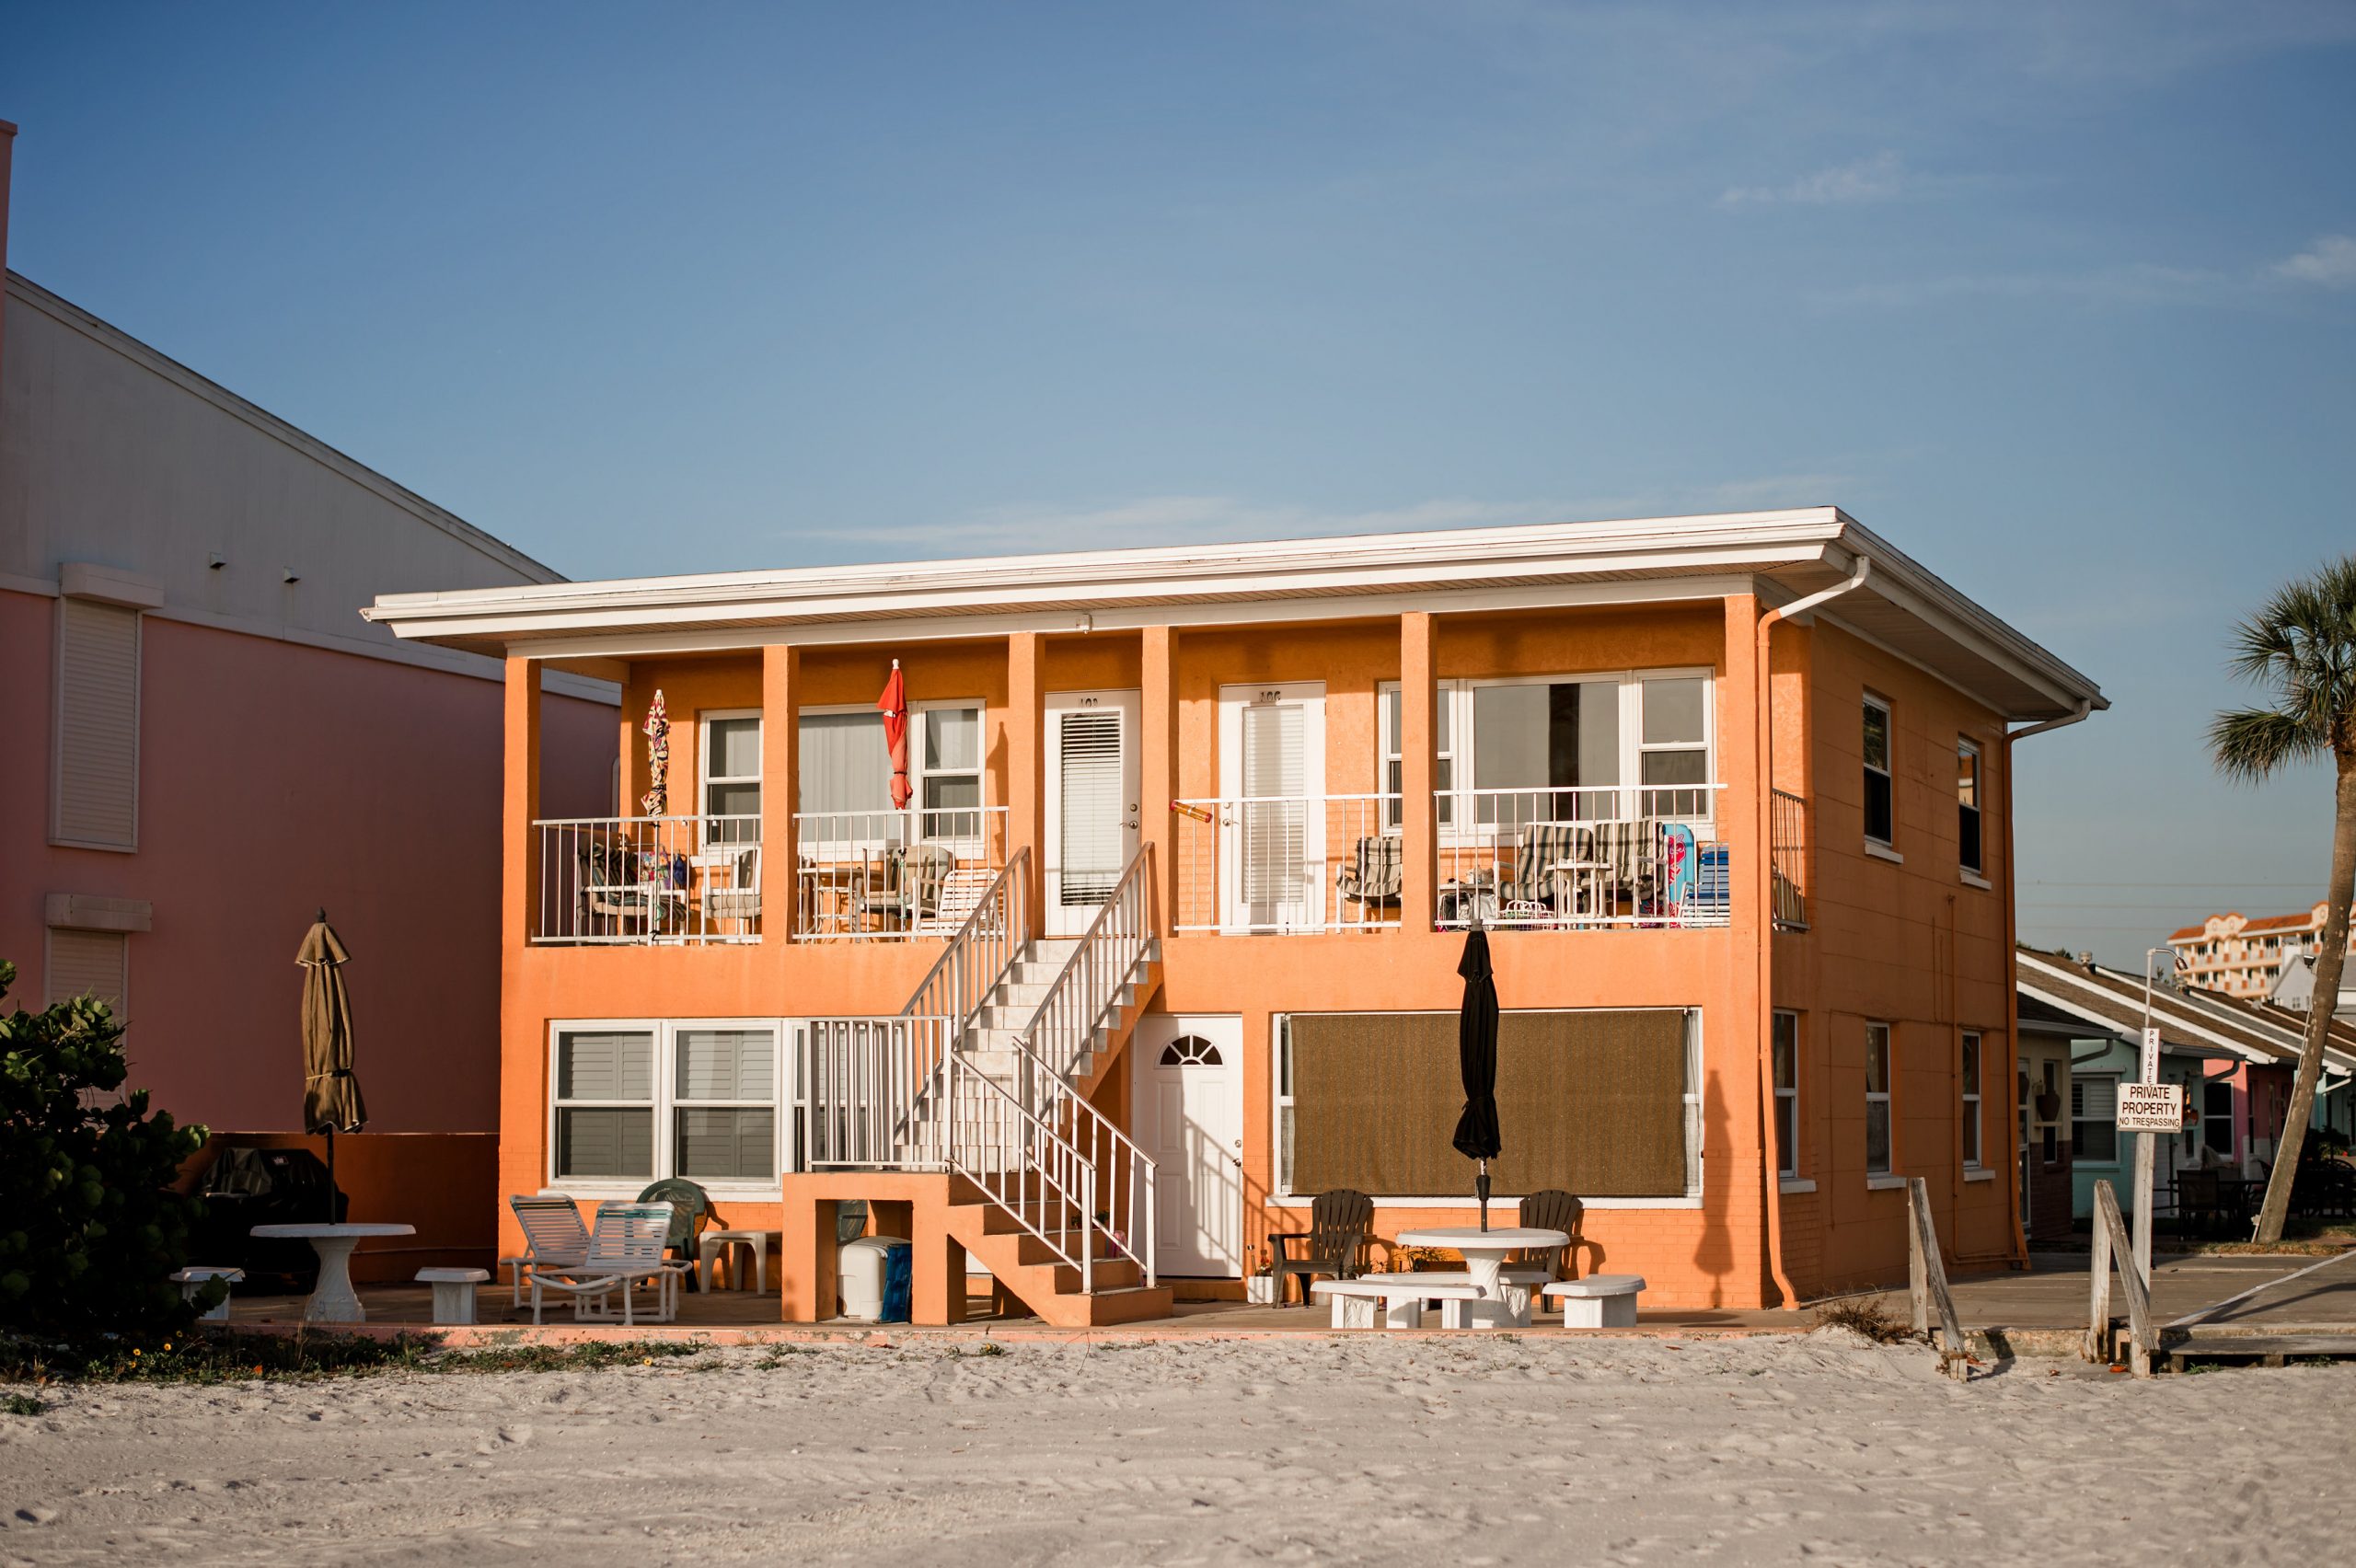 Florida Shores Units 10B, 10C & 10D - Florida beach vacation rentals directly on the Gulf of Mexico located in Redington Shores, Florida.